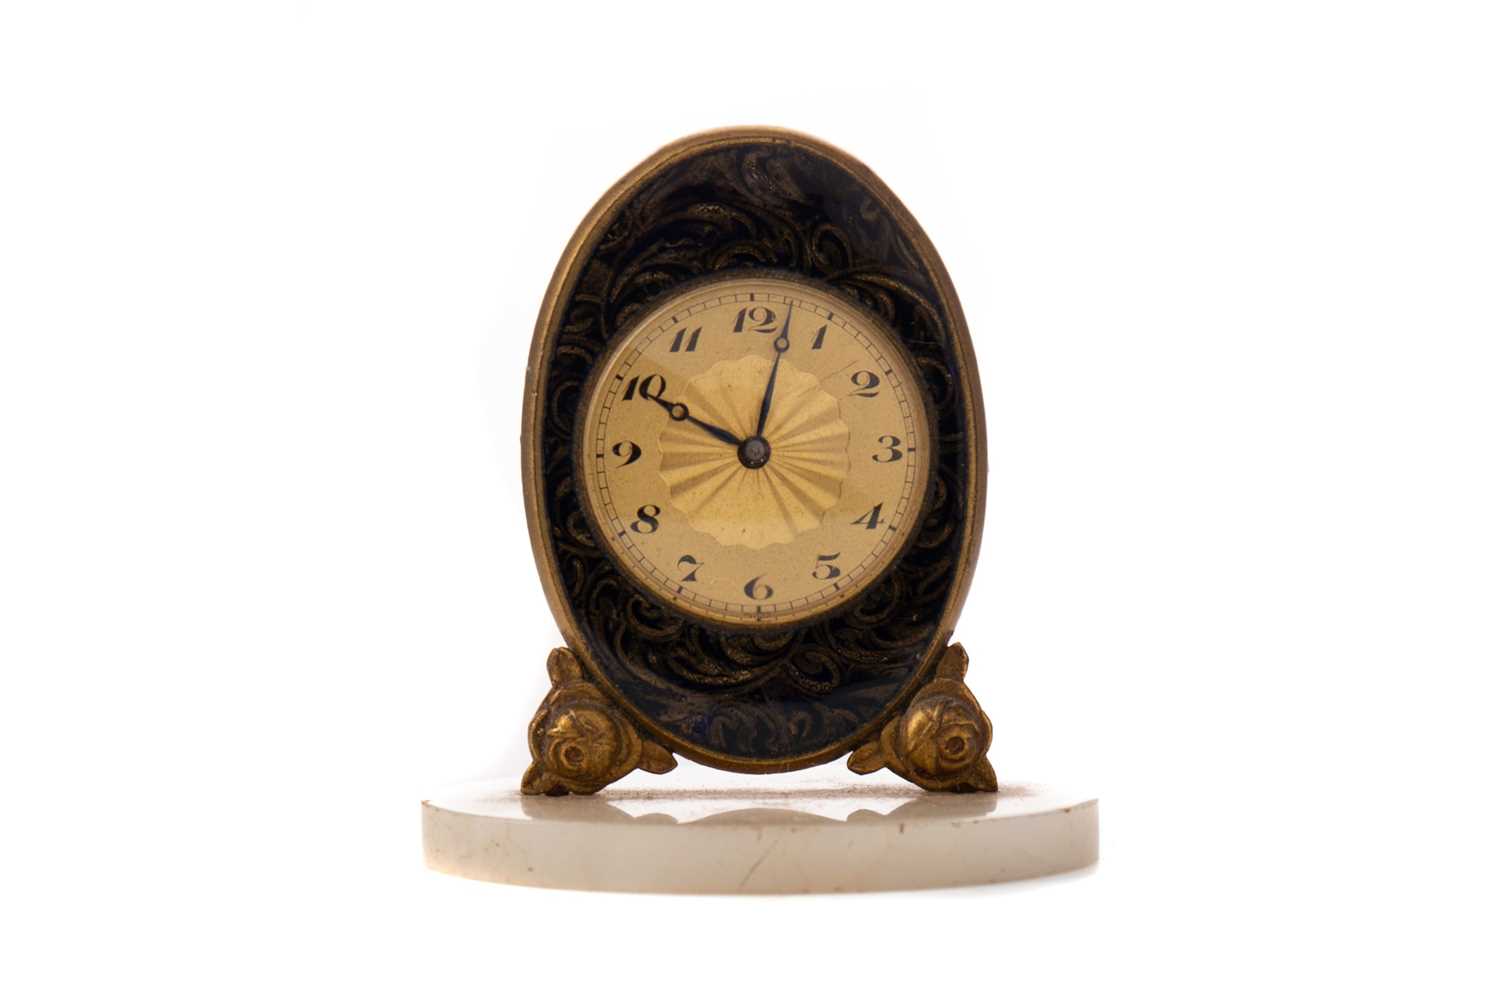 Lot 1118 - A LATE 19TH / EARLY 20TH CENTURY SWISS TRAVELLING TIMEPIECE